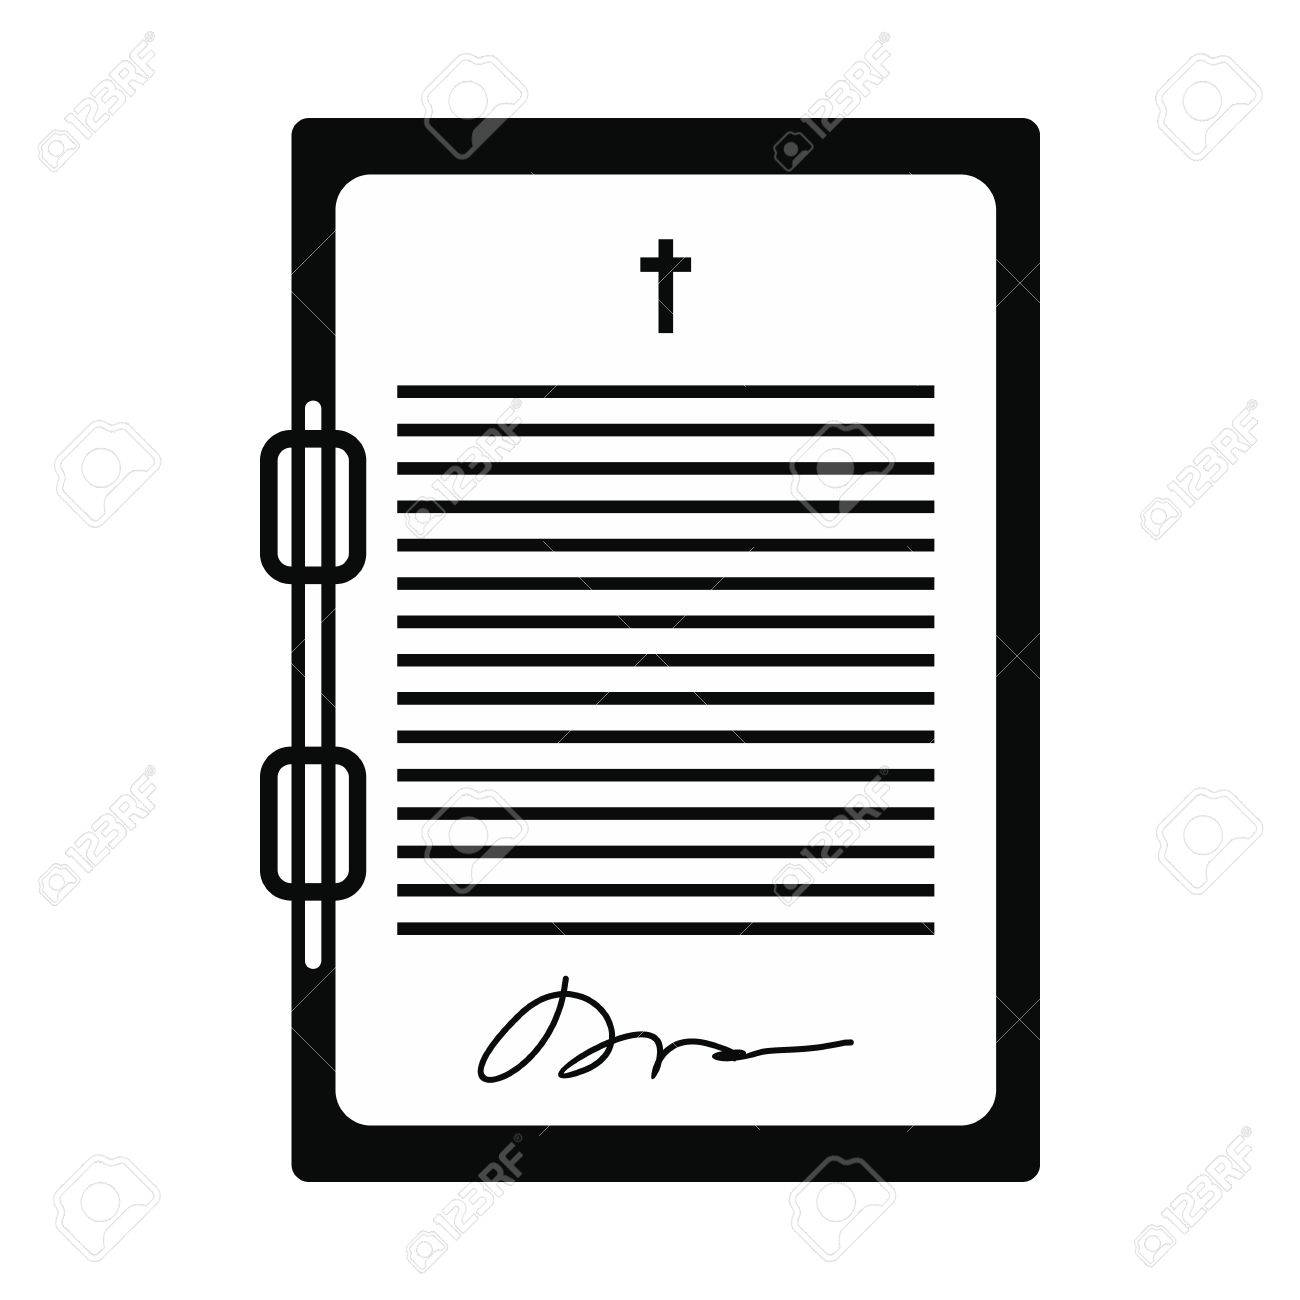 Testament Letter Black Simple Icon Isolated On White Background